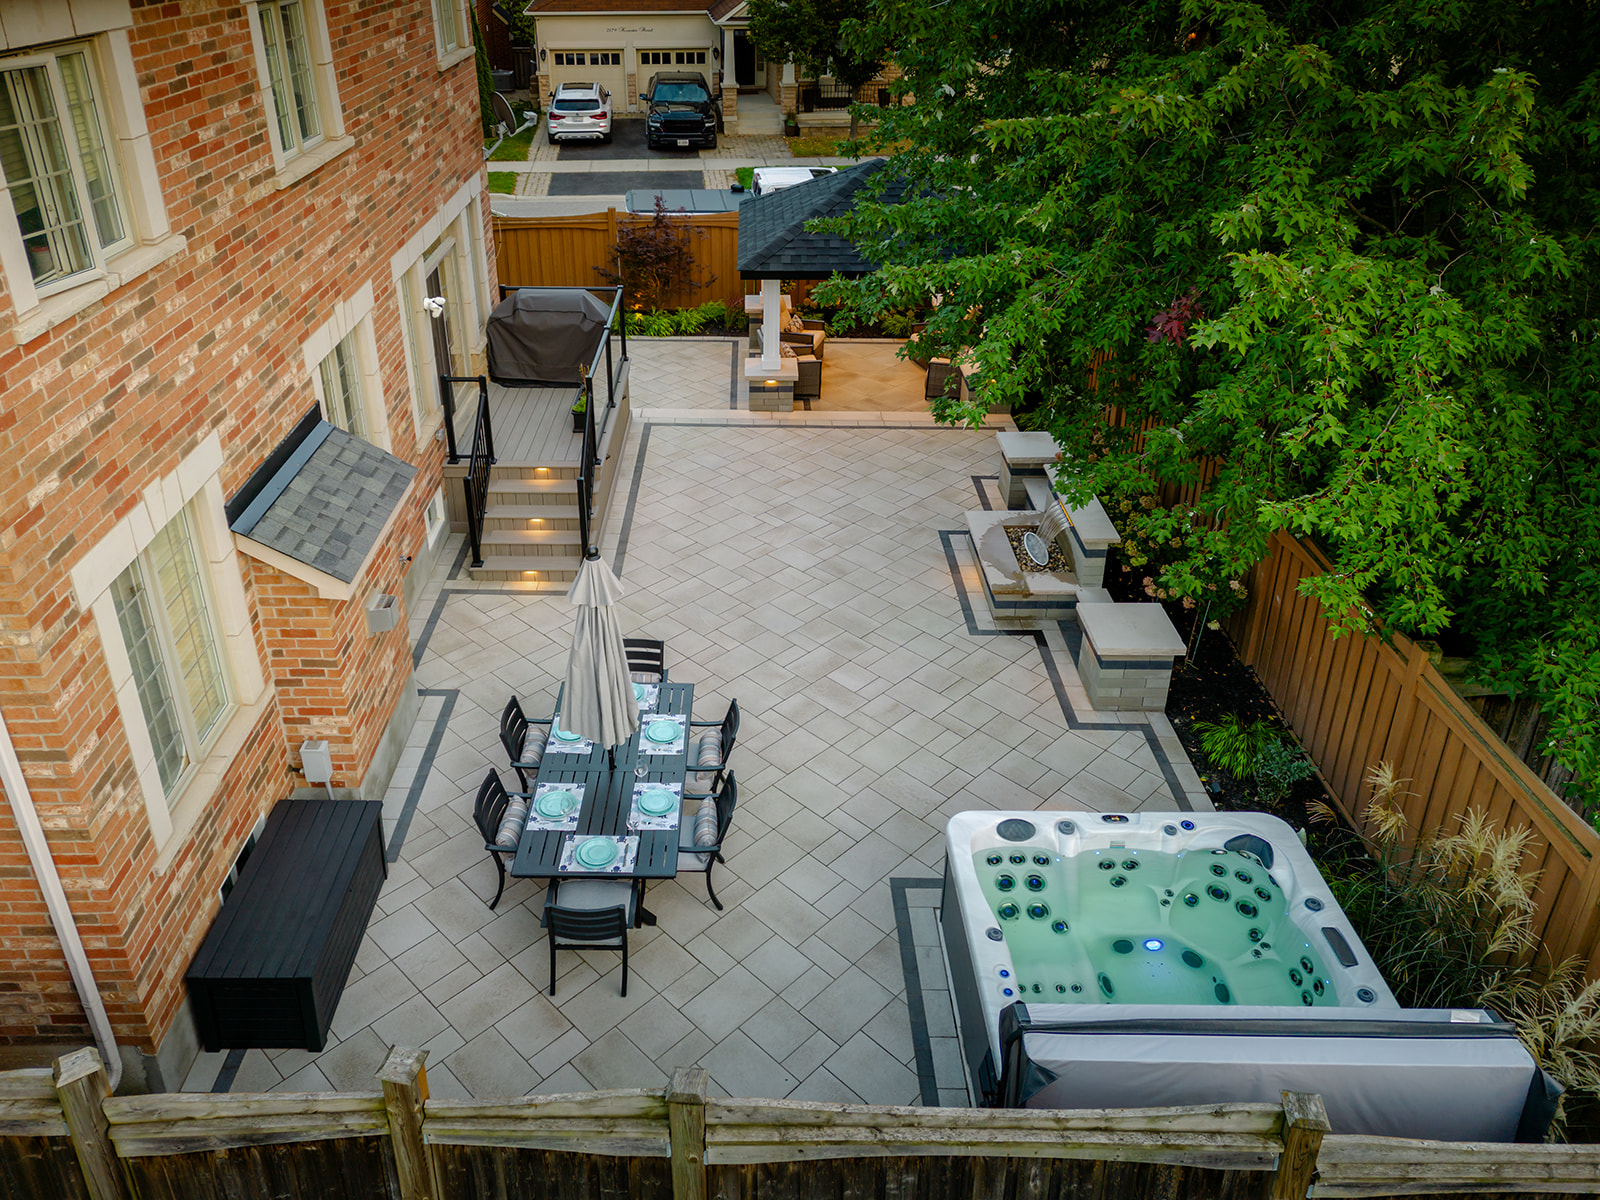 Drone shot of the backyard with the jacuzzi and outdoor seating.